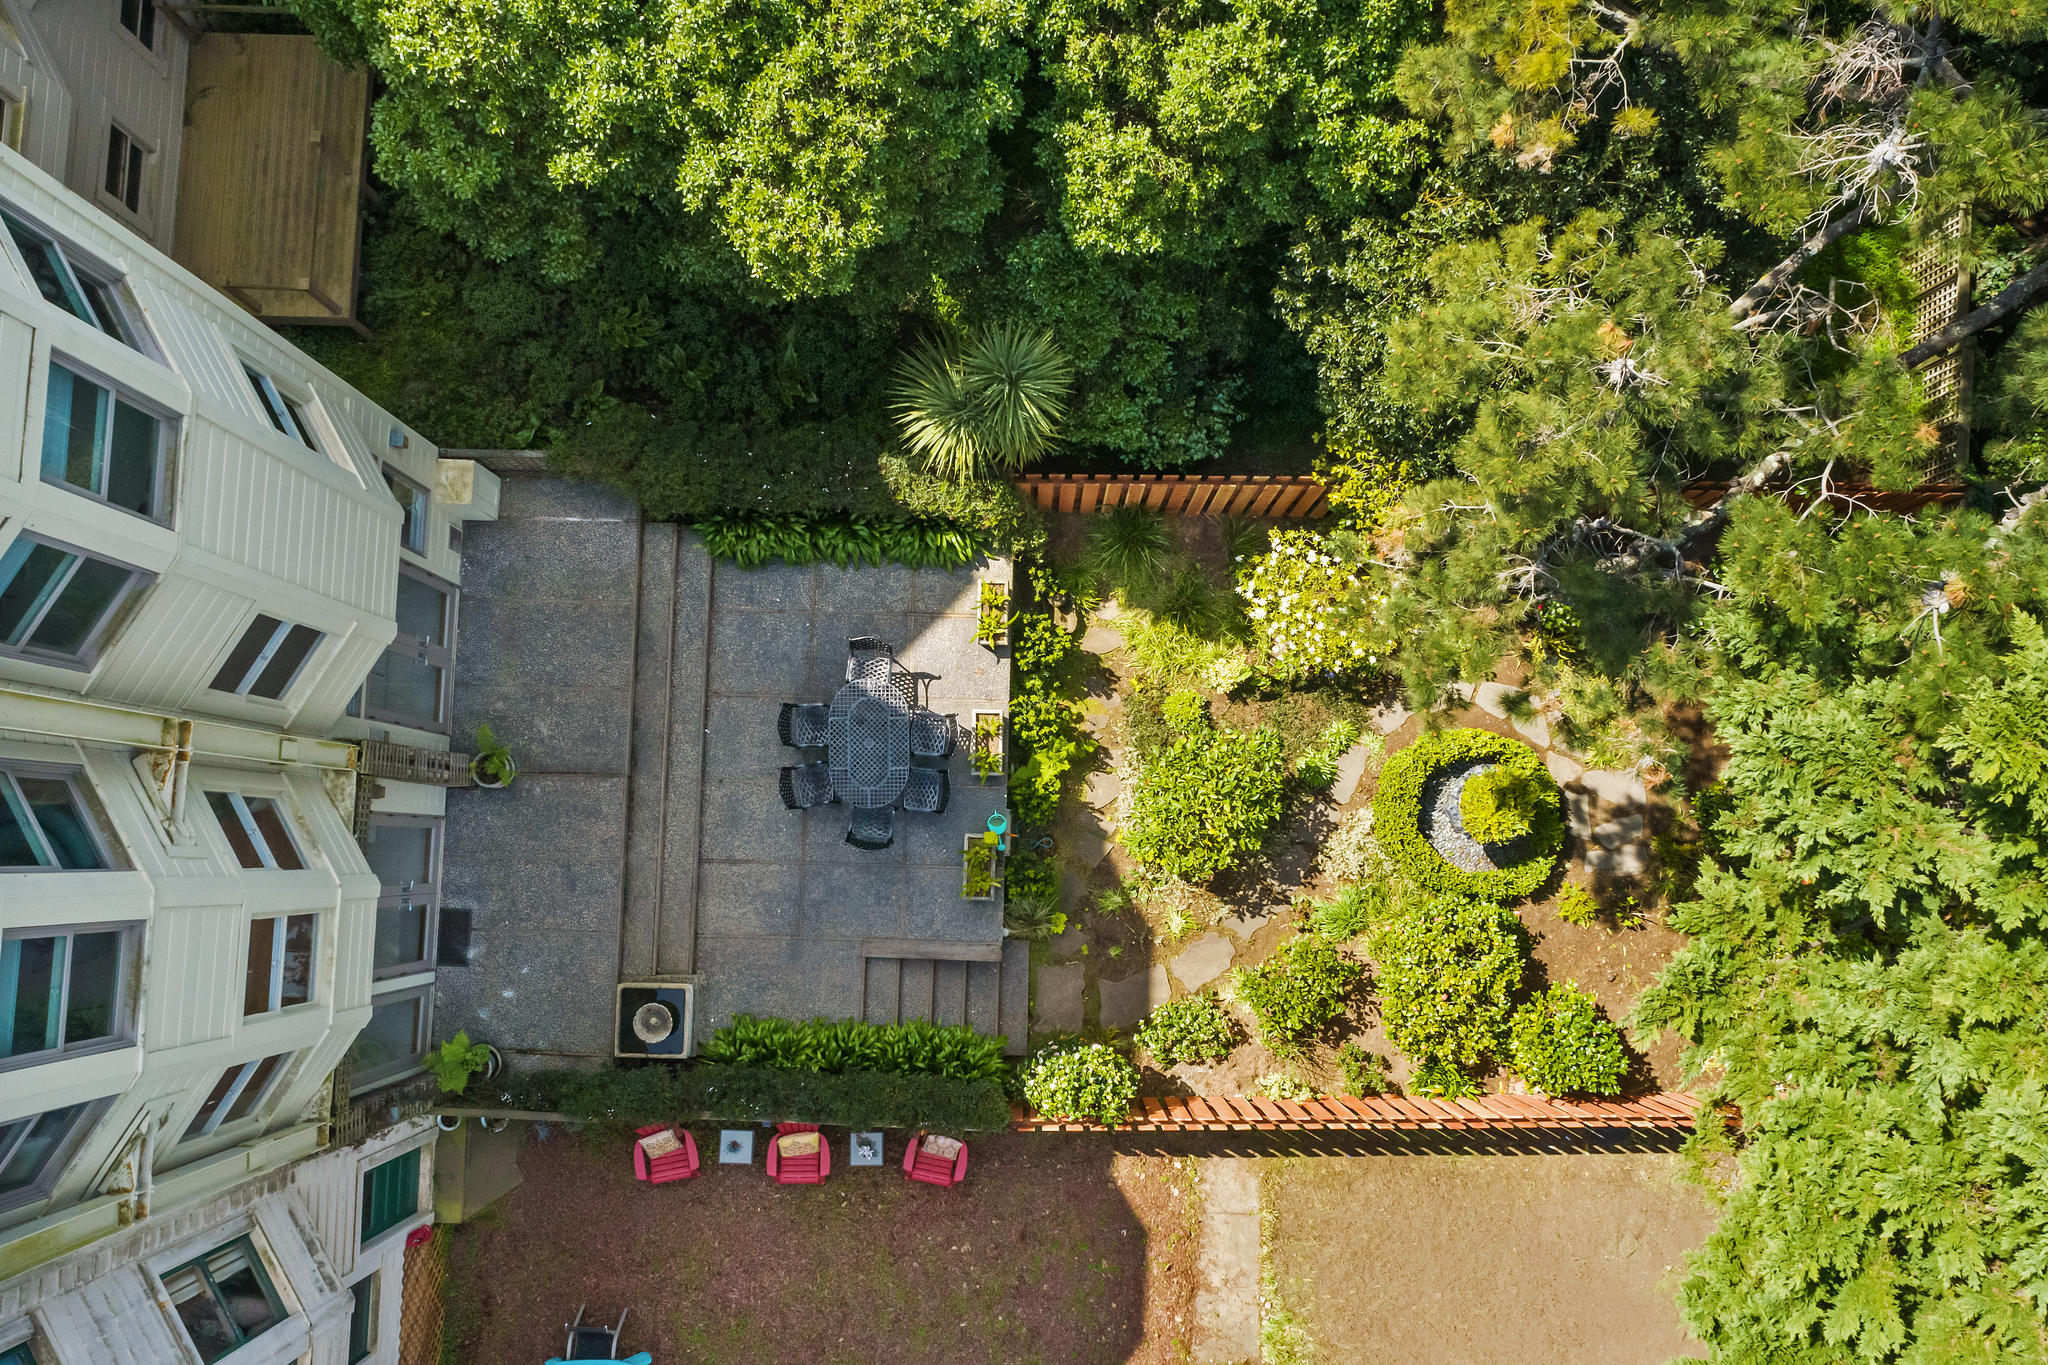 Property Photo: Aerial view of the rear yard at 36 Parnassus Avenue, showing the large garden and outdoor area